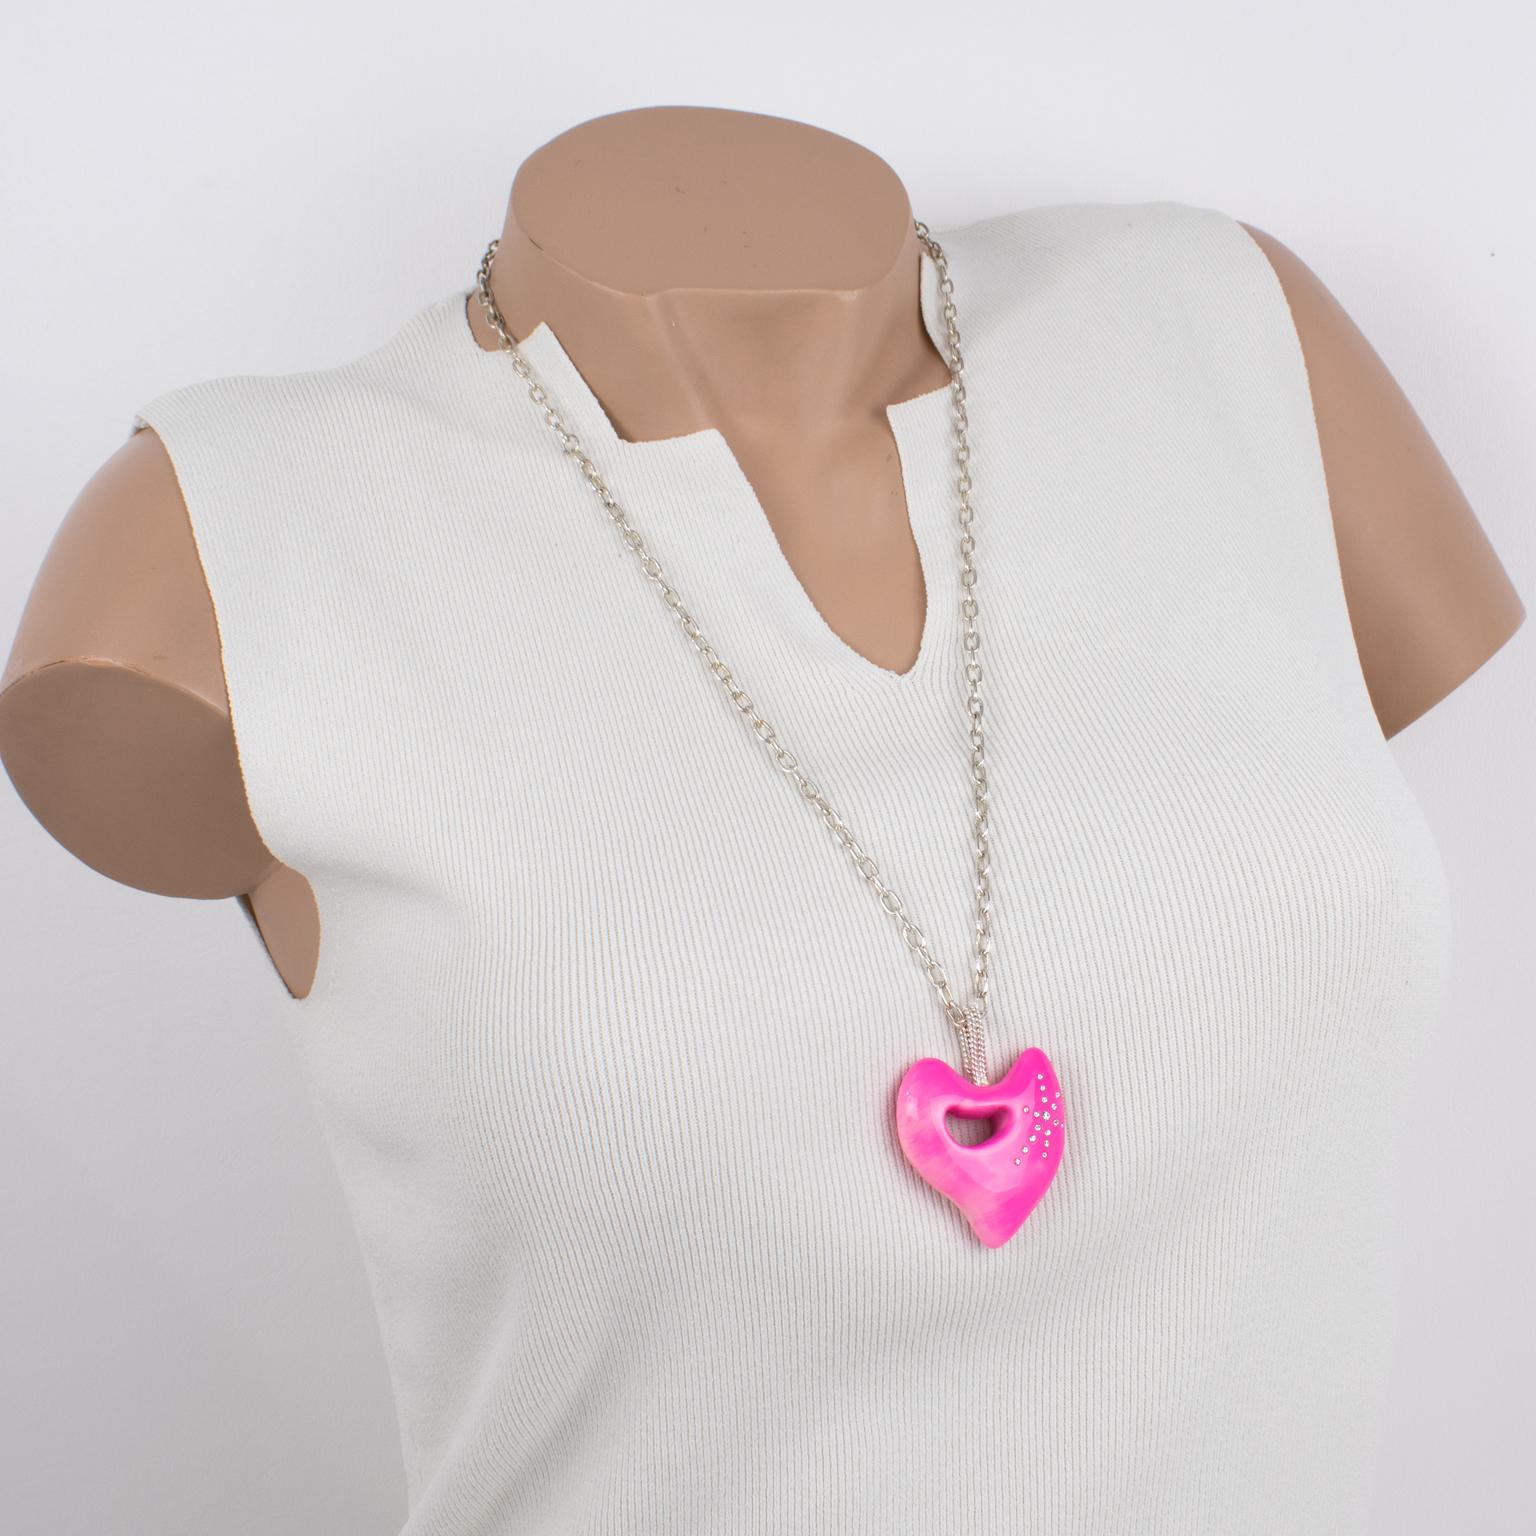 Modern Christian Lacroix Silver Plate Chain Necklace with Hot Pink Resin Heart For Sale